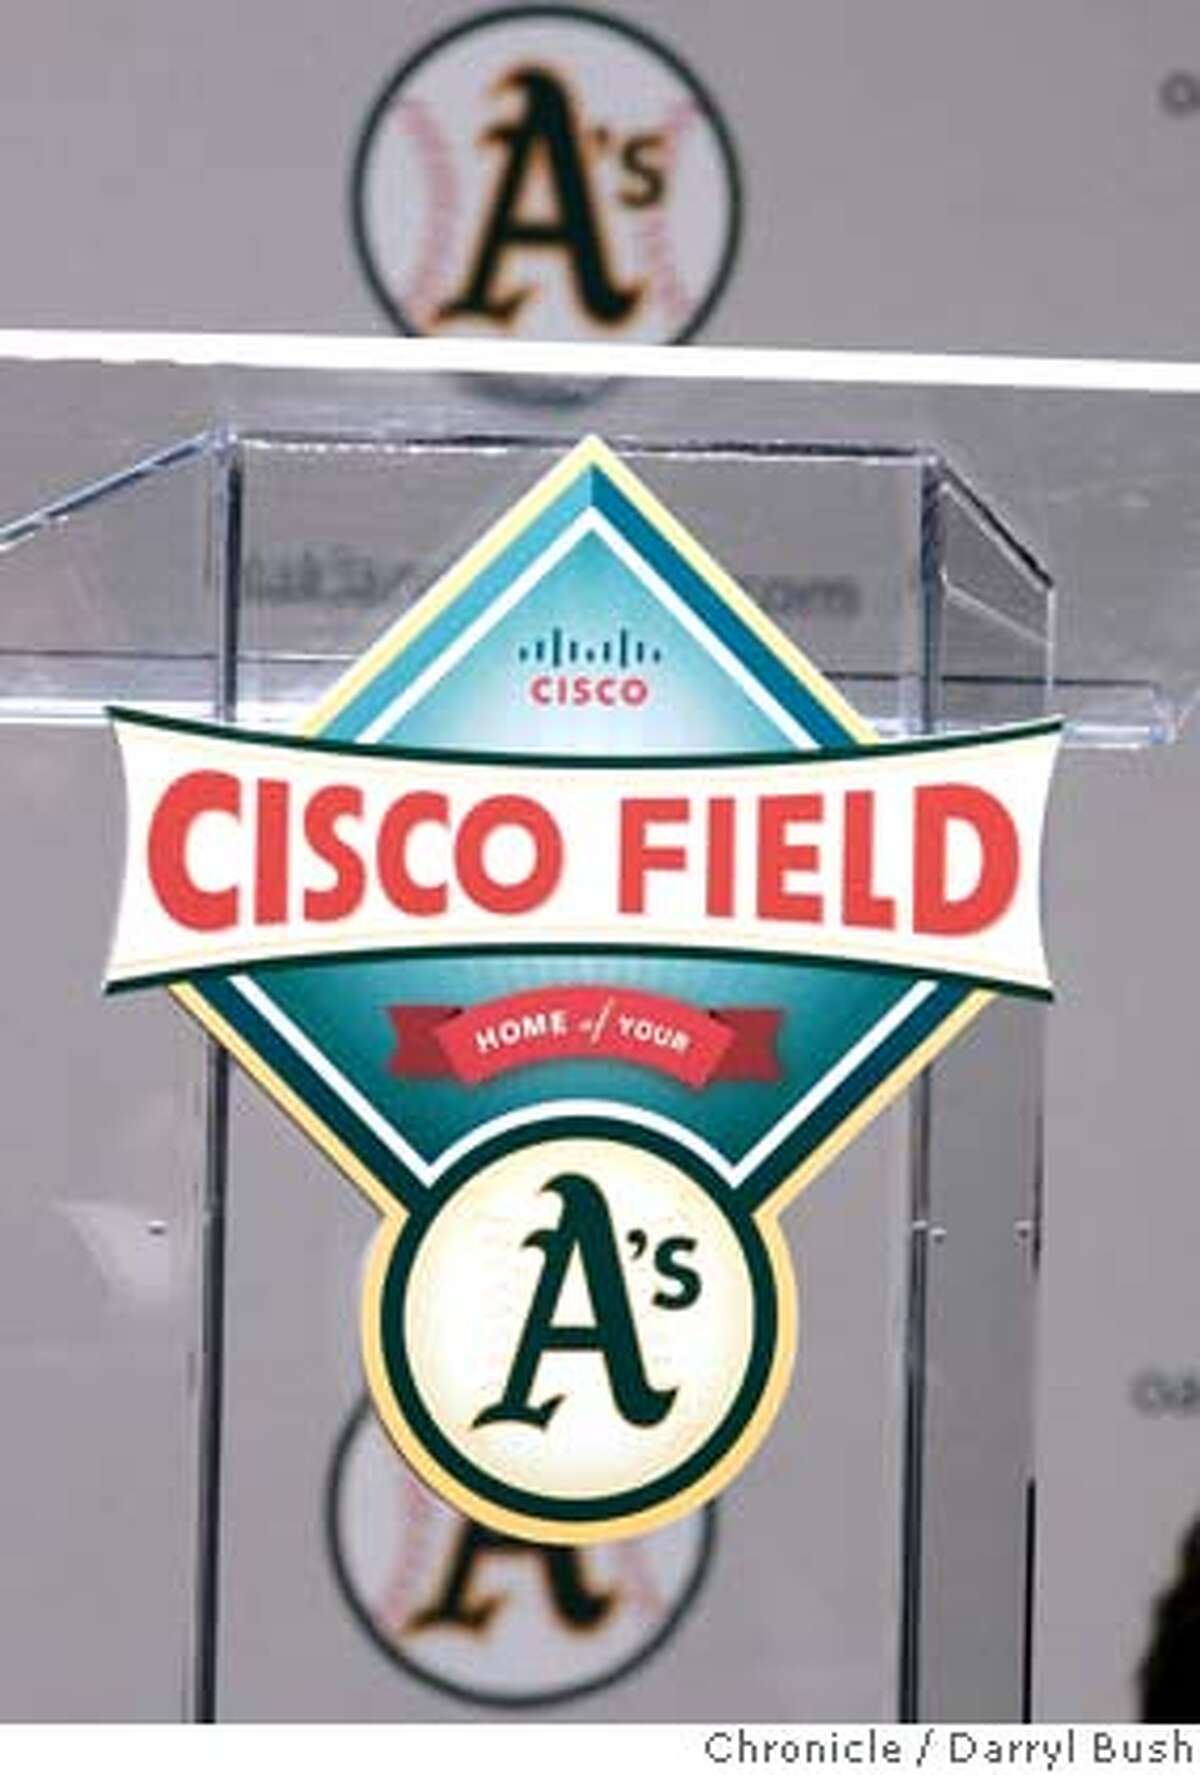 The new Cisco Field logo for the Oakland Athletics is unveiled at a press conference podium, for team to be moved to Fremont, Oakland Athletics press conference at Cisco Systems in (cq) in San Jose, CA, on Tuesday, November, 14, 2006. 11/14/06 Darryl Bush / The Chronicle ** Lew Wolf, John Chambers, Allan H. (Bud) Selig, Michael Crowley (cq) (cq)